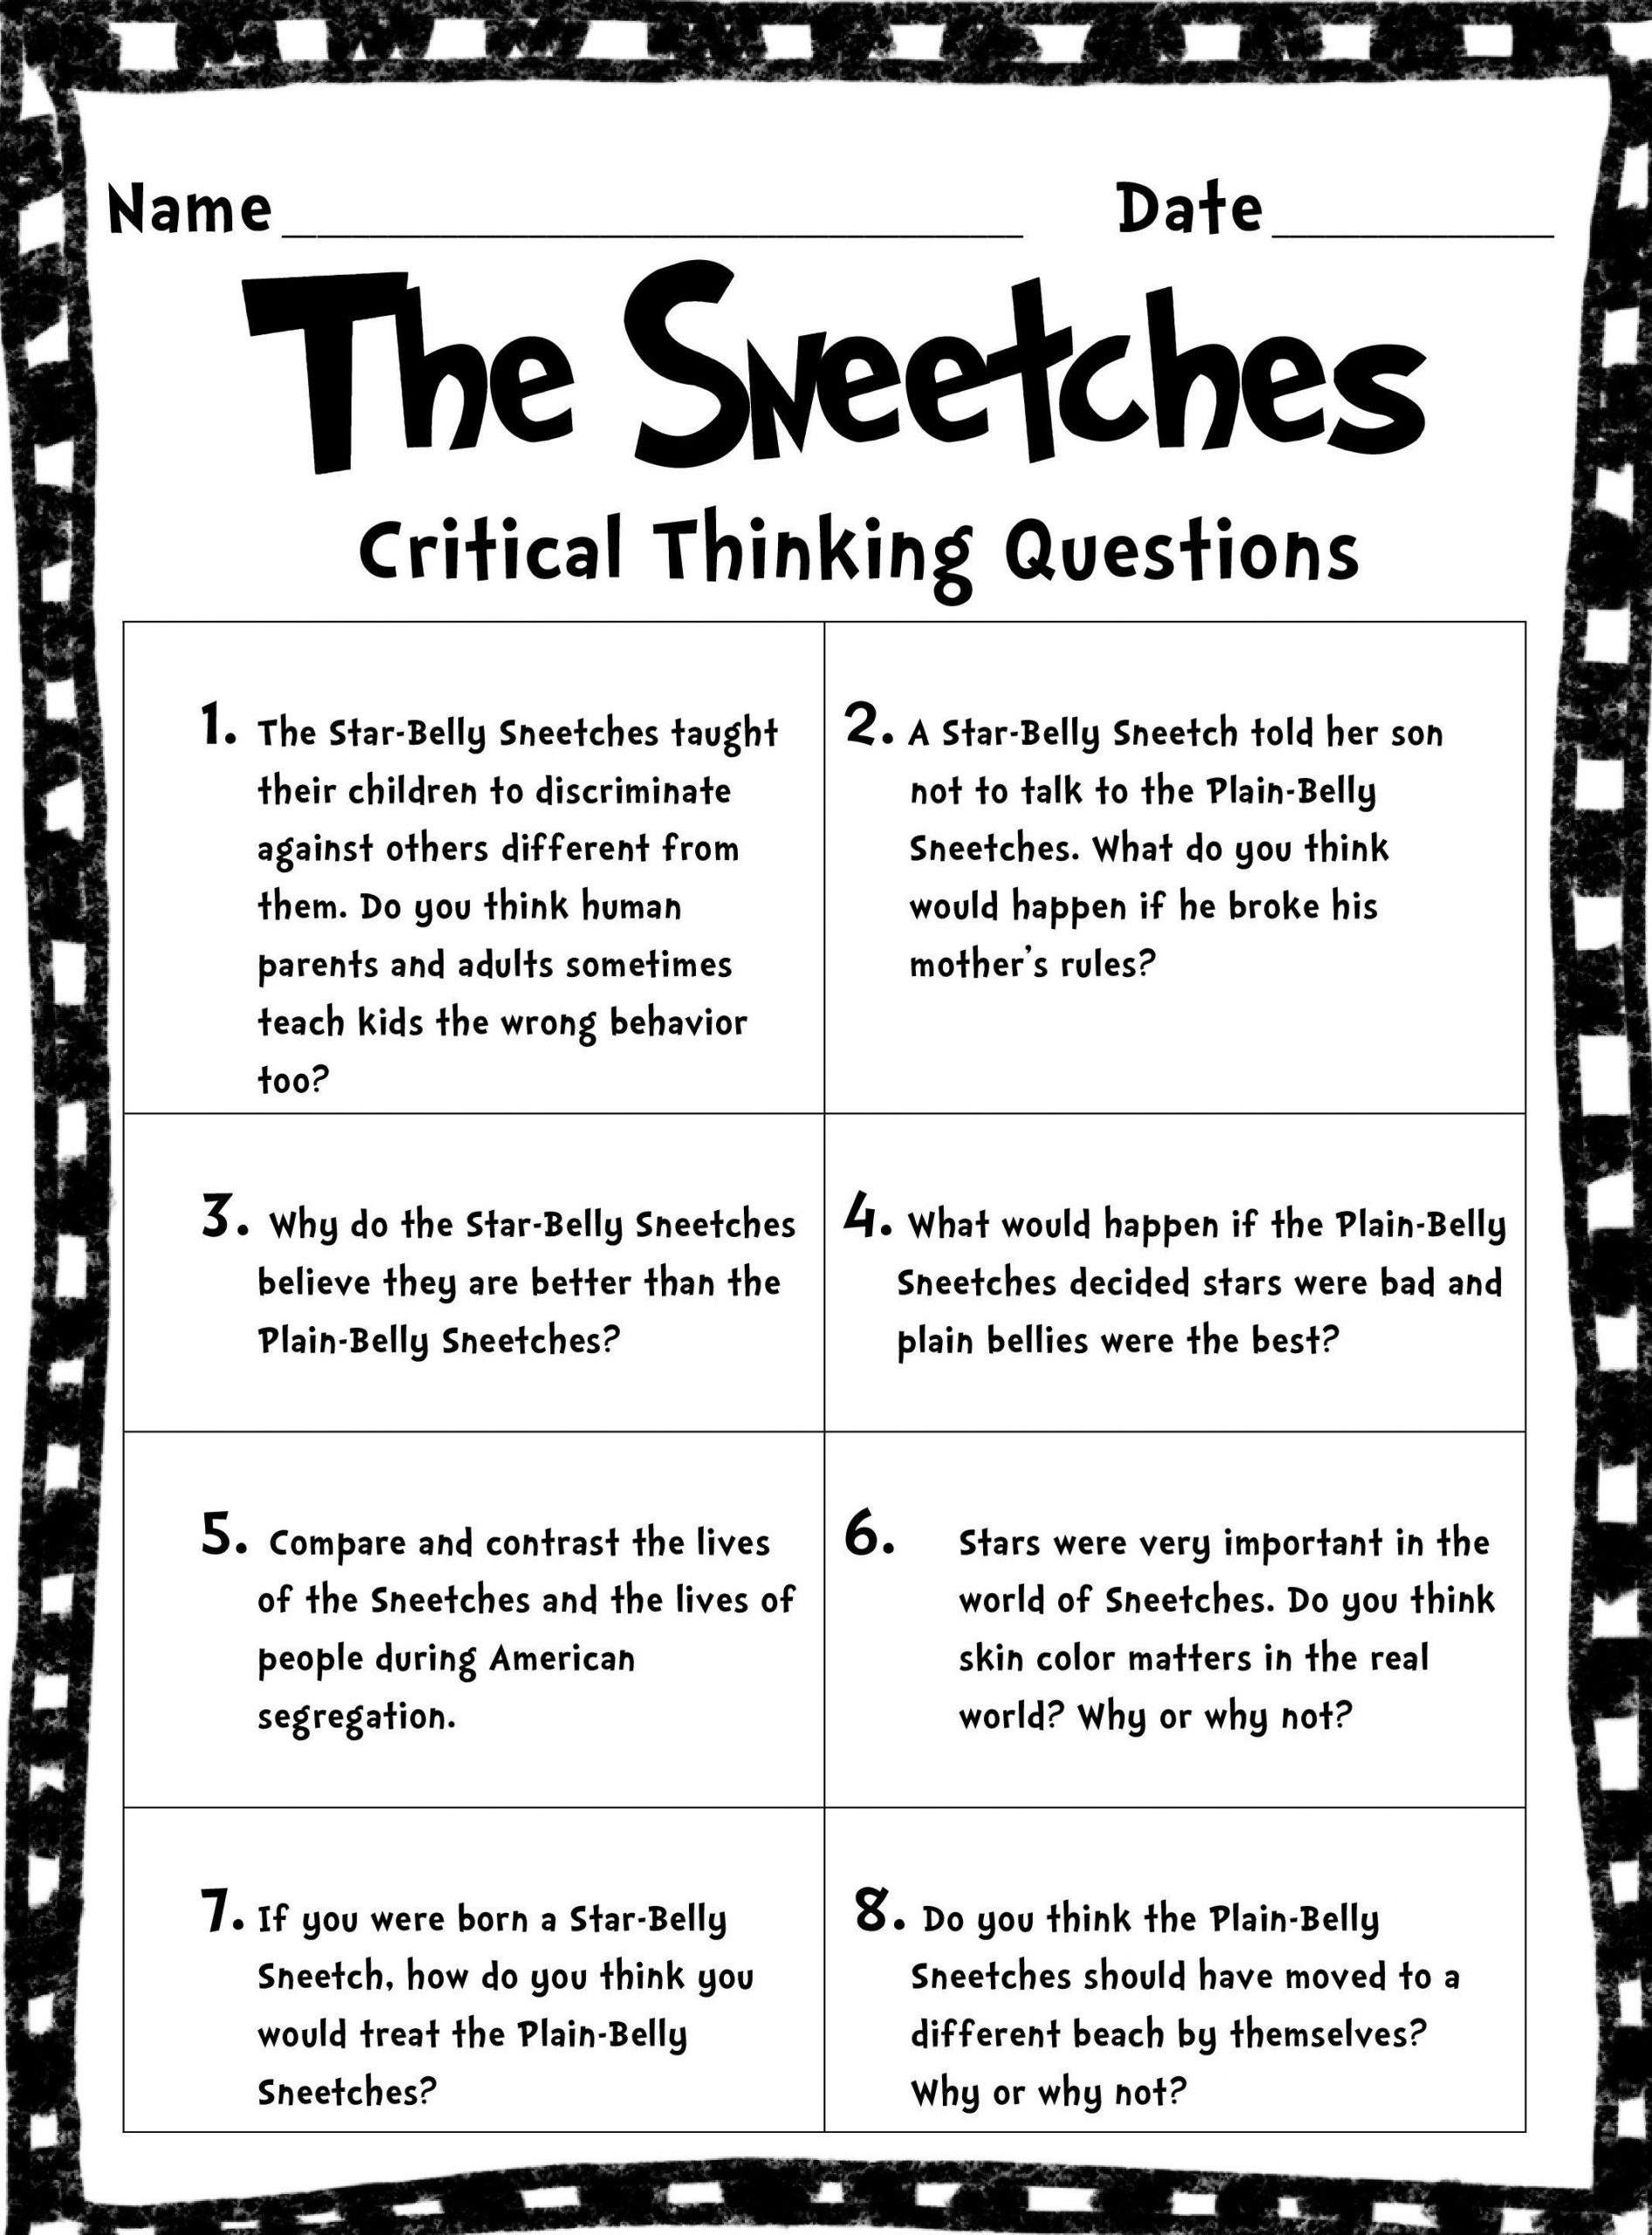 Image Result For The Sneetches Lesson Plan | Seuss Classroom